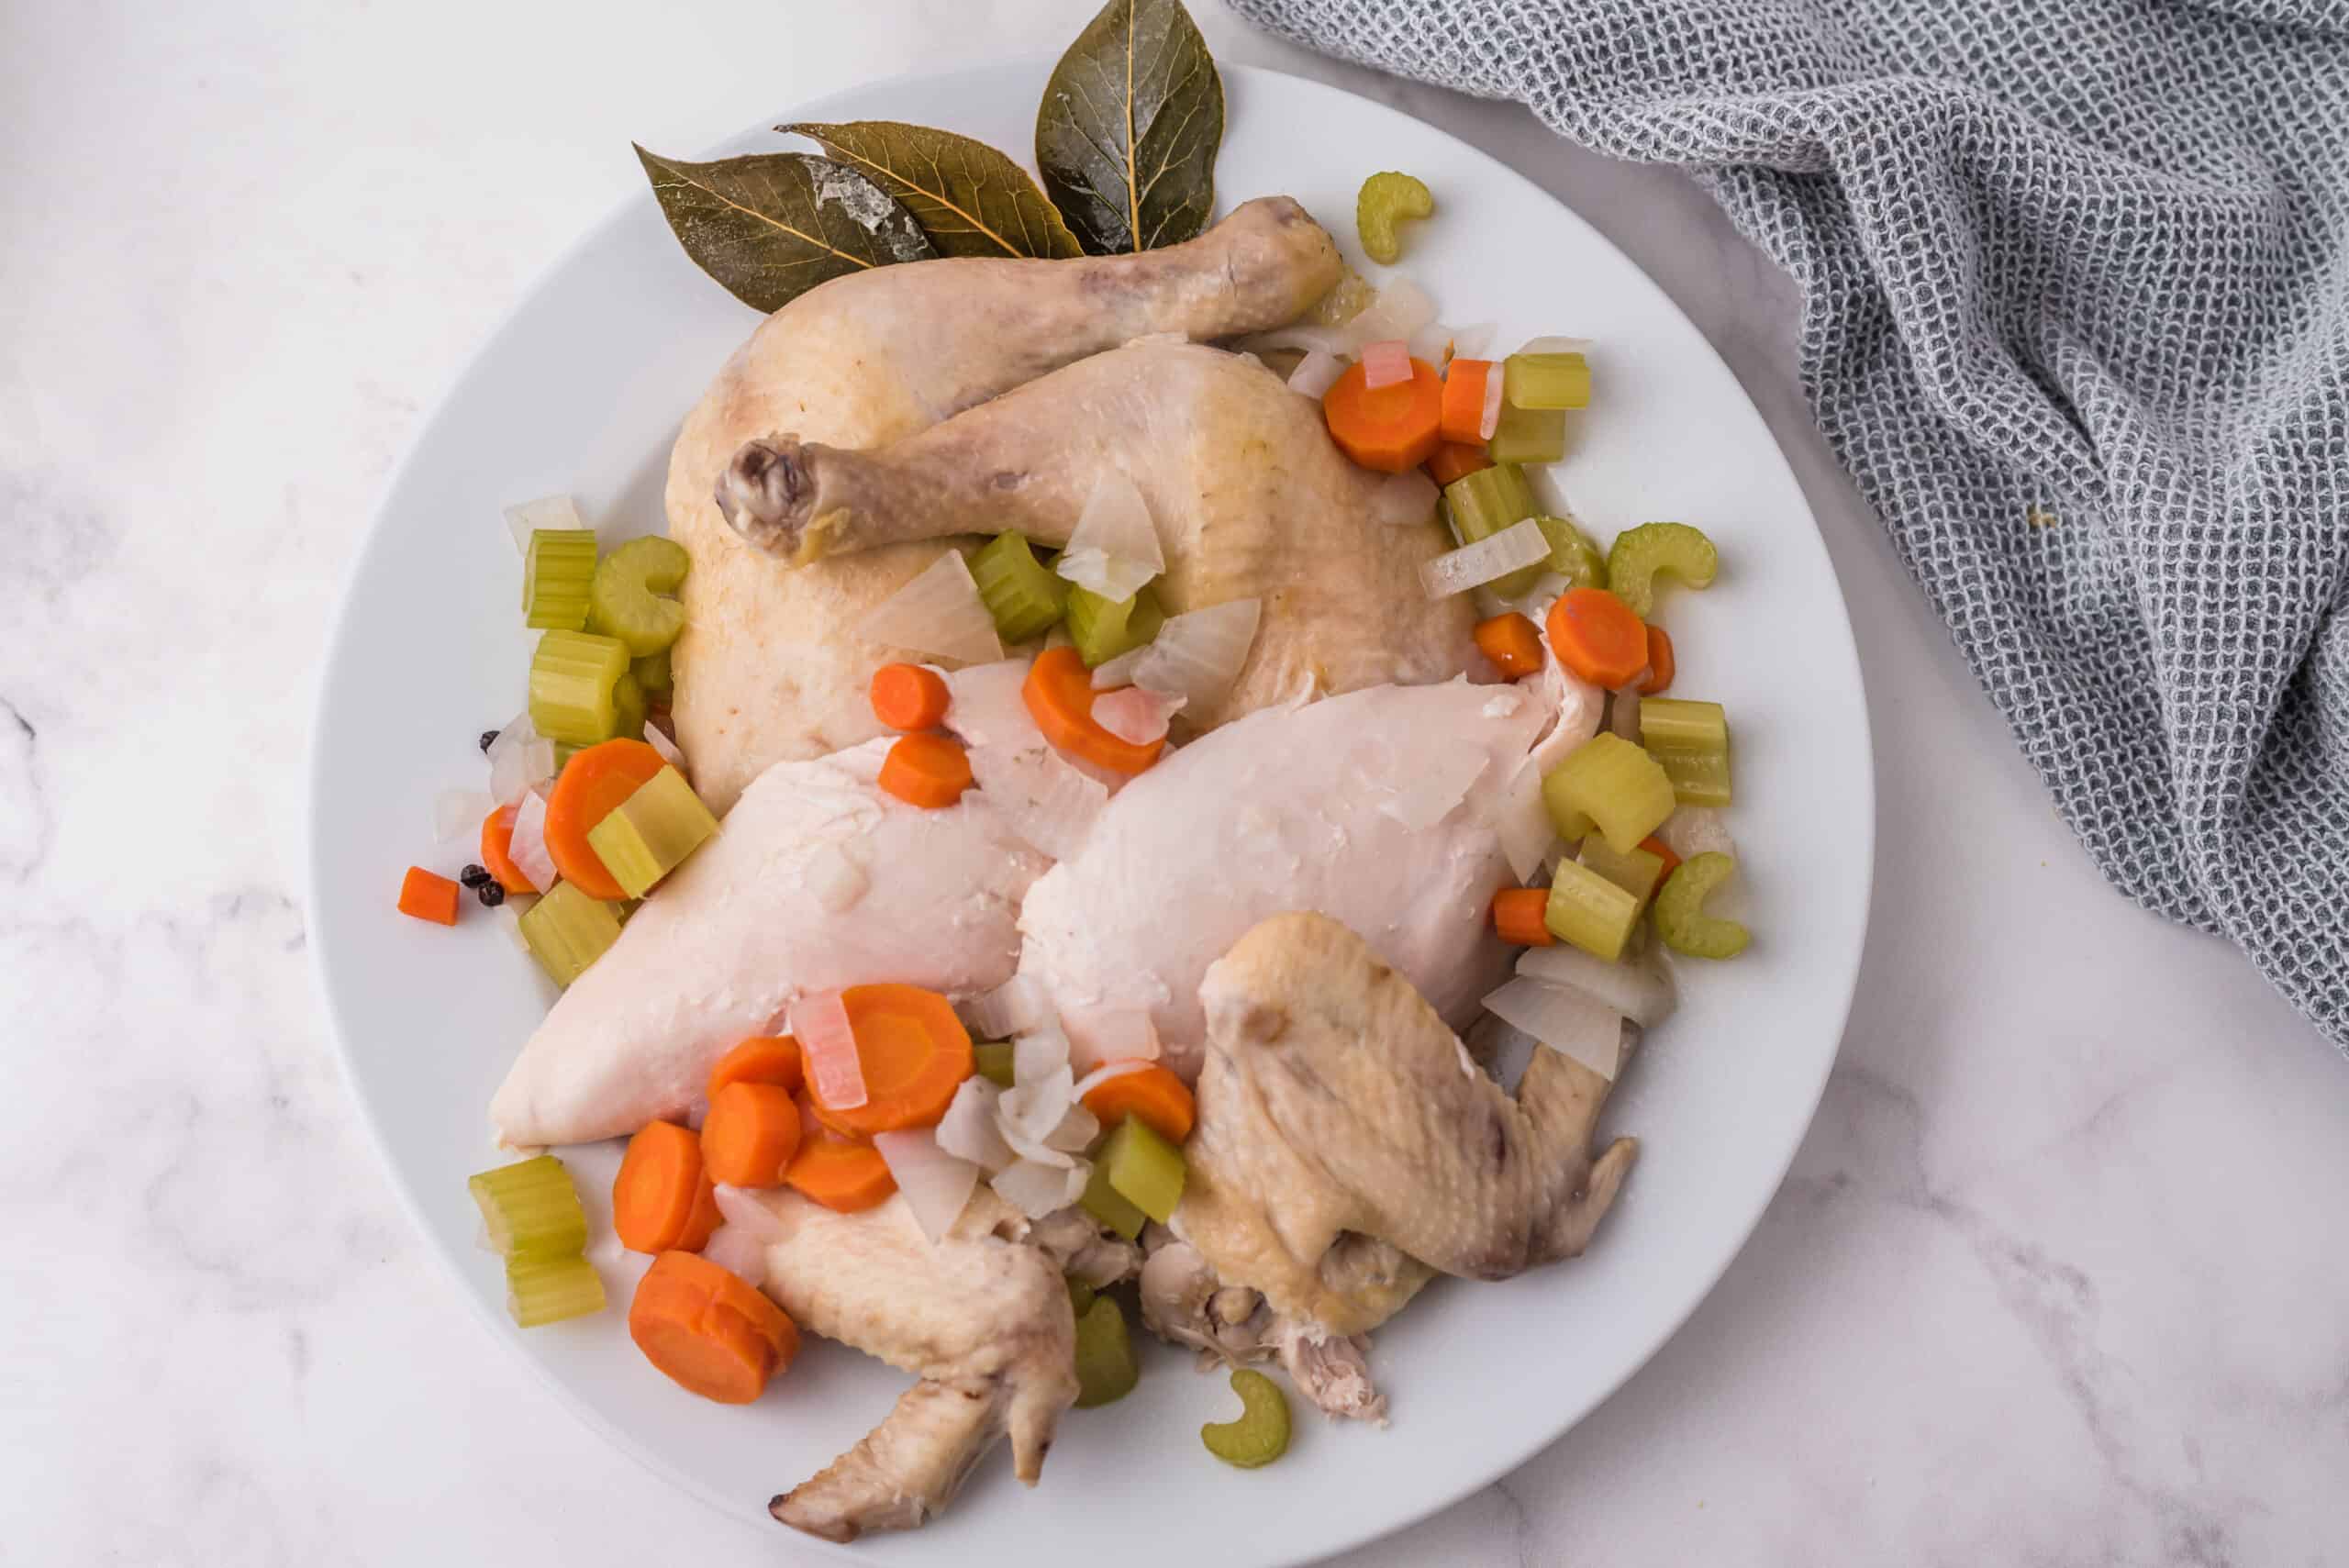 Boiled Chicken To Eat Now & Broth For Later - Southern Eats & Goodies